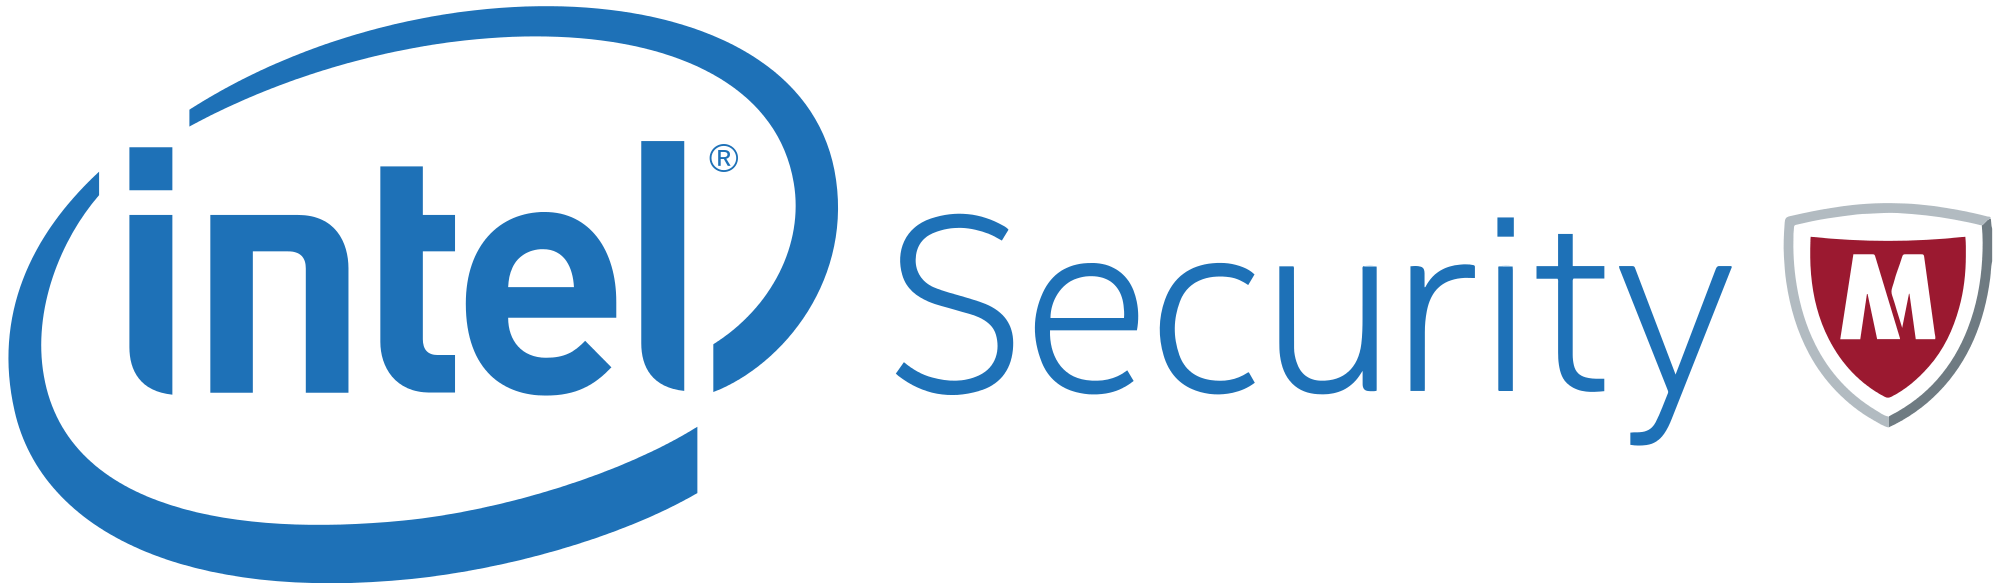 Intel Security Logo - File:Intel Security logo.svg - Wikimedia Commons